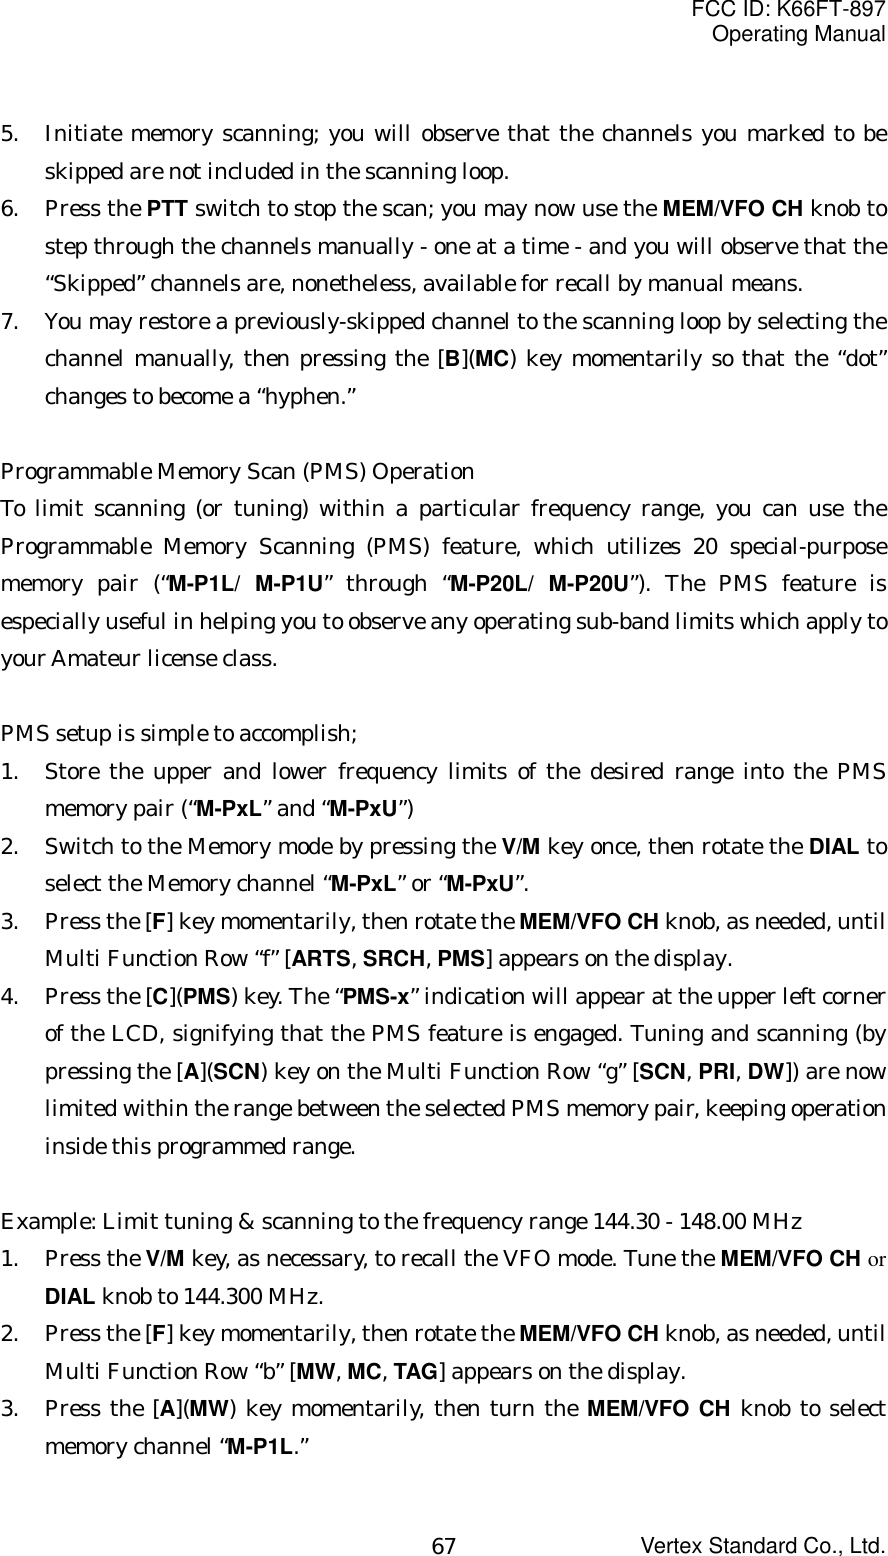 FCC ID: K66FT-897Operating ManualVertex Standard Co., Ltd.675. Initiate memory scanning; you will observe that the channels you marked to beskipped are not included in the scanning loop.6. Press the PTT switch to stop the scan; you may now use the MEM/VFO CH knob tostep through the channels manually - one at a time - and you will observe that the“Skipped” channels are, nonetheless, available for recall by manual means.7. You may restore a previously-skipped channel to the scanning loop by selecting thechannel manually, then pressing the [B](MC) key momentarily so that the “dot”changes to become a “hyphen.”Programmable Memory Scan (PMS) OperationTo limit scanning (or tuning) within a particular frequency range, you can use theProgrammable Memory Scanning (PMS) feature, which utilizes 20 special-purposememory pair (“M-P1L/ M-P1U” through “M-P20L/ M-P20U”). The PMS feature isespecially useful in helping you to observe any operating sub-band limits which apply toyour Amateur license class.PMS setup is simple to accomplish;1. Store the upper and lower frequency limits of the desired range into the PMSmemory pair (“M-PxL” and “M-PxU”)2. Switch to the Memory mode by pressing the V/M key once, then rotate the DIAL toselect the Memory channel “M-PxL” or “M-PxU”.3. Press the [F] key momentarily, then rotate the MEM/VFO CH knob, as needed, untilMulti Function Row “f” [ARTS, SRCH, PMS] appears on the display.4. Press the [C](PMS) key. The “PMS-x” indication will appear at the upper left cornerof the LCD, signifying that the PMS feature is engaged. Tuning and scanning (bypressing the [A](SCN) key on the Multi Function Row “g” [SCN, PRI, DW]) are nowlimited within the range between the selected PMS memory pair, keeping operationinside this programmed range.Example: Limit tuning &amp; scanning to the frequency range 144.30 - 148.00 MHz1. Press the V/M key, as necessary, to recall the VFO mode. Tune the MEM/VFO CH orDIAL knob to 144.300 MHz.2. Press the [F] key momentarily, then rotate the MEM/VFO CH knob, as needed, untilMulti Function Row “b” [MW, MC, TAG] appears on the display.3. Press the [A](MW) key momentarily, then turn the MEM/VFO CH knob to selectmemory channel “M-P1L.”